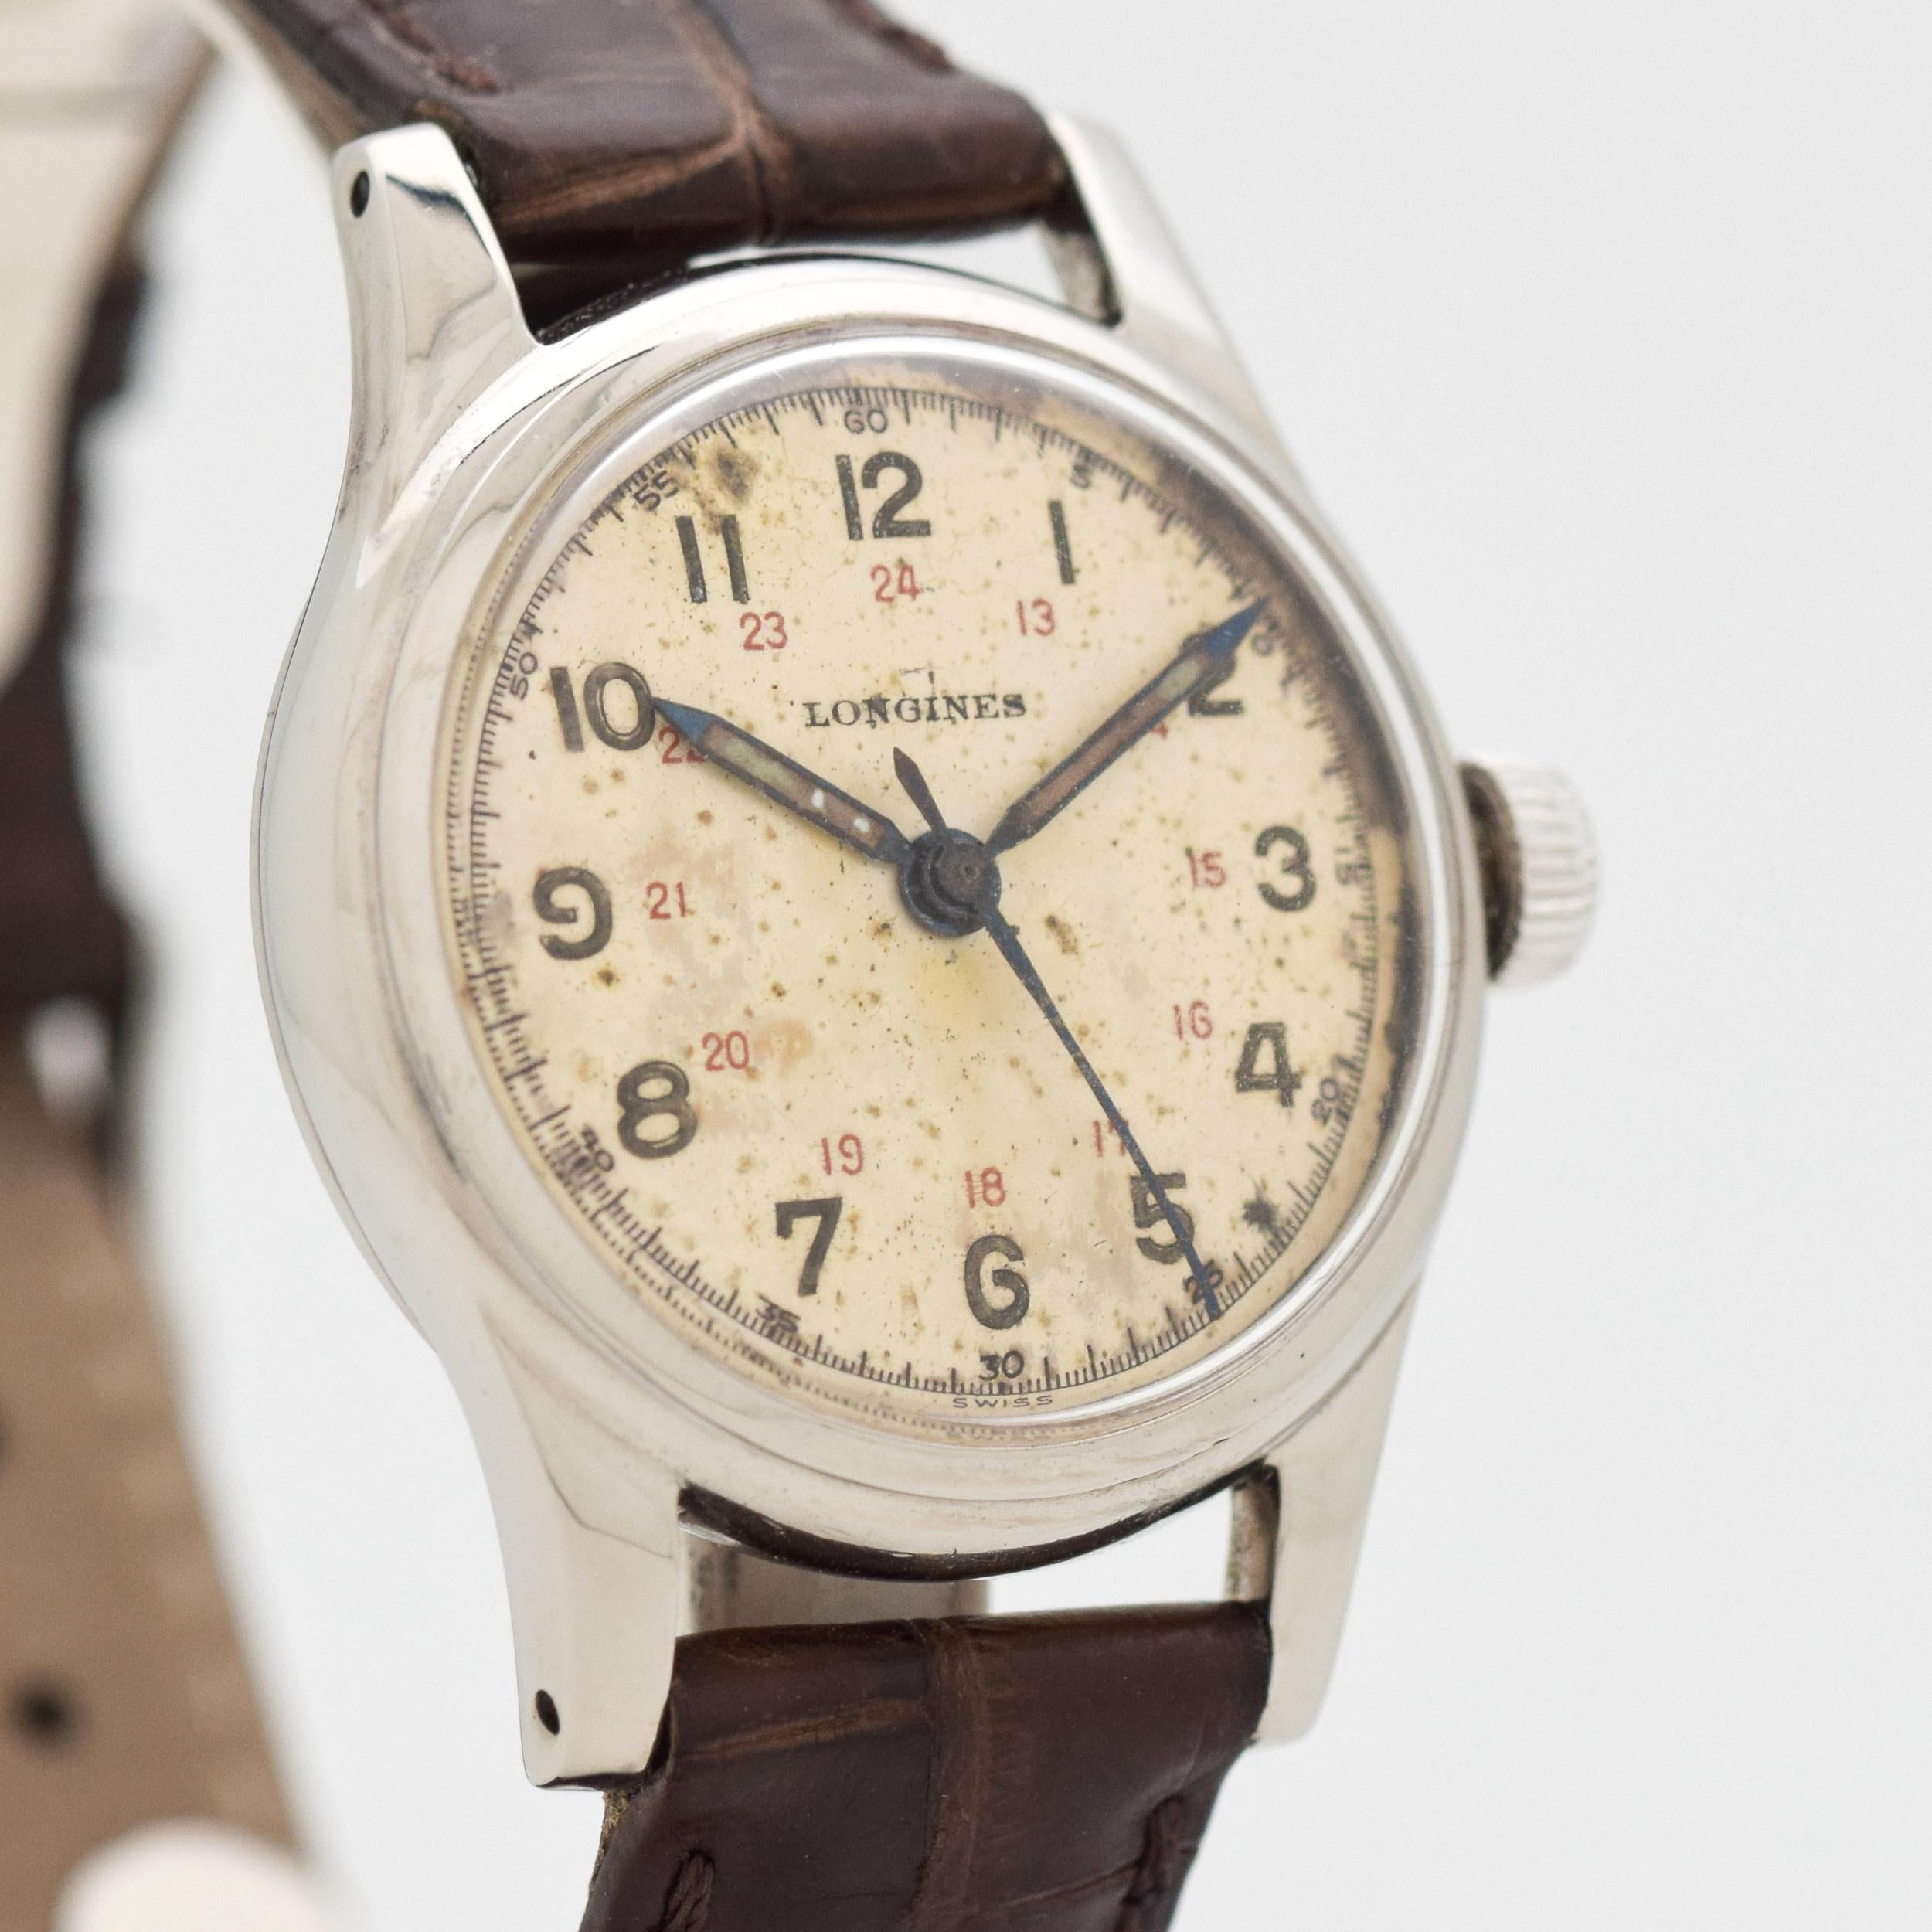 1949 Vintage Longines RARE and COLLECTIBLE Post WWII Military Stainless Steel watch with Original Silver Dial with Both 1 - 12 and 13 - 24 Hour Arabic Numbers. Case size, 32mm x 39mm lug to lug (1.26 in. x 1.54 in.) - Powered by a 17-jewel, manual